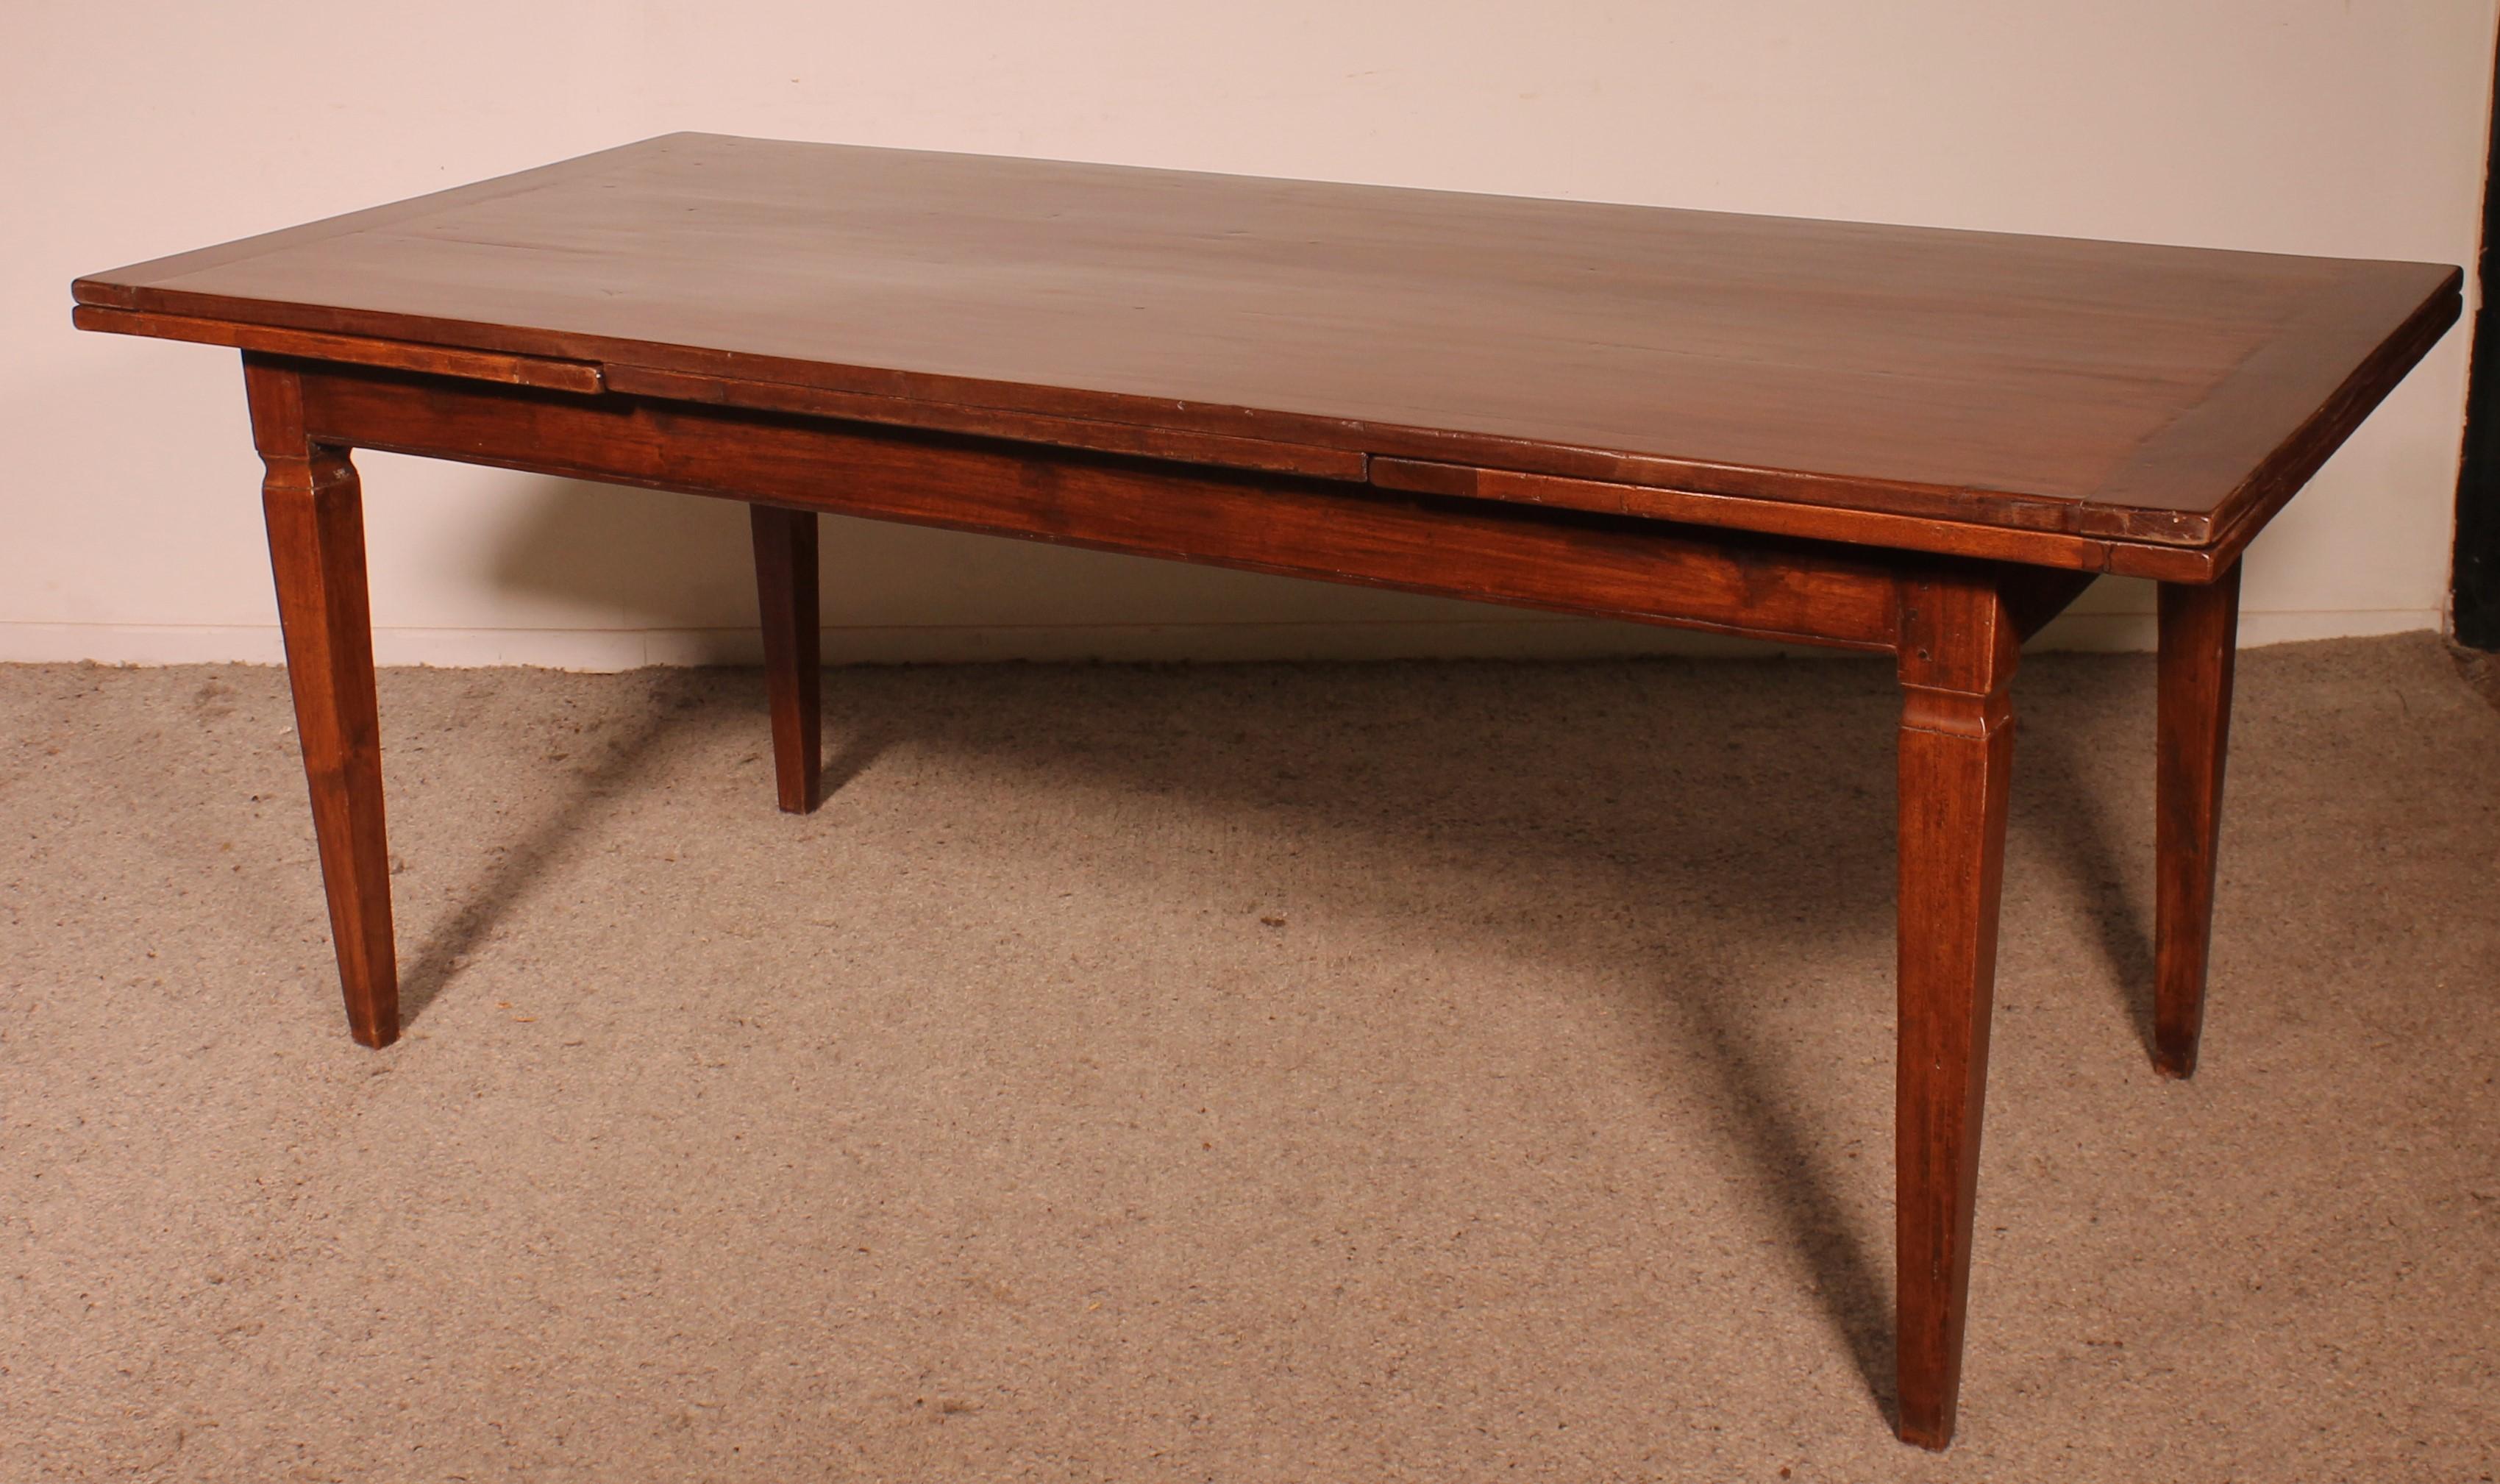 Aesthetic Movement Dutch Refectory Table From The 19th Century For Sale